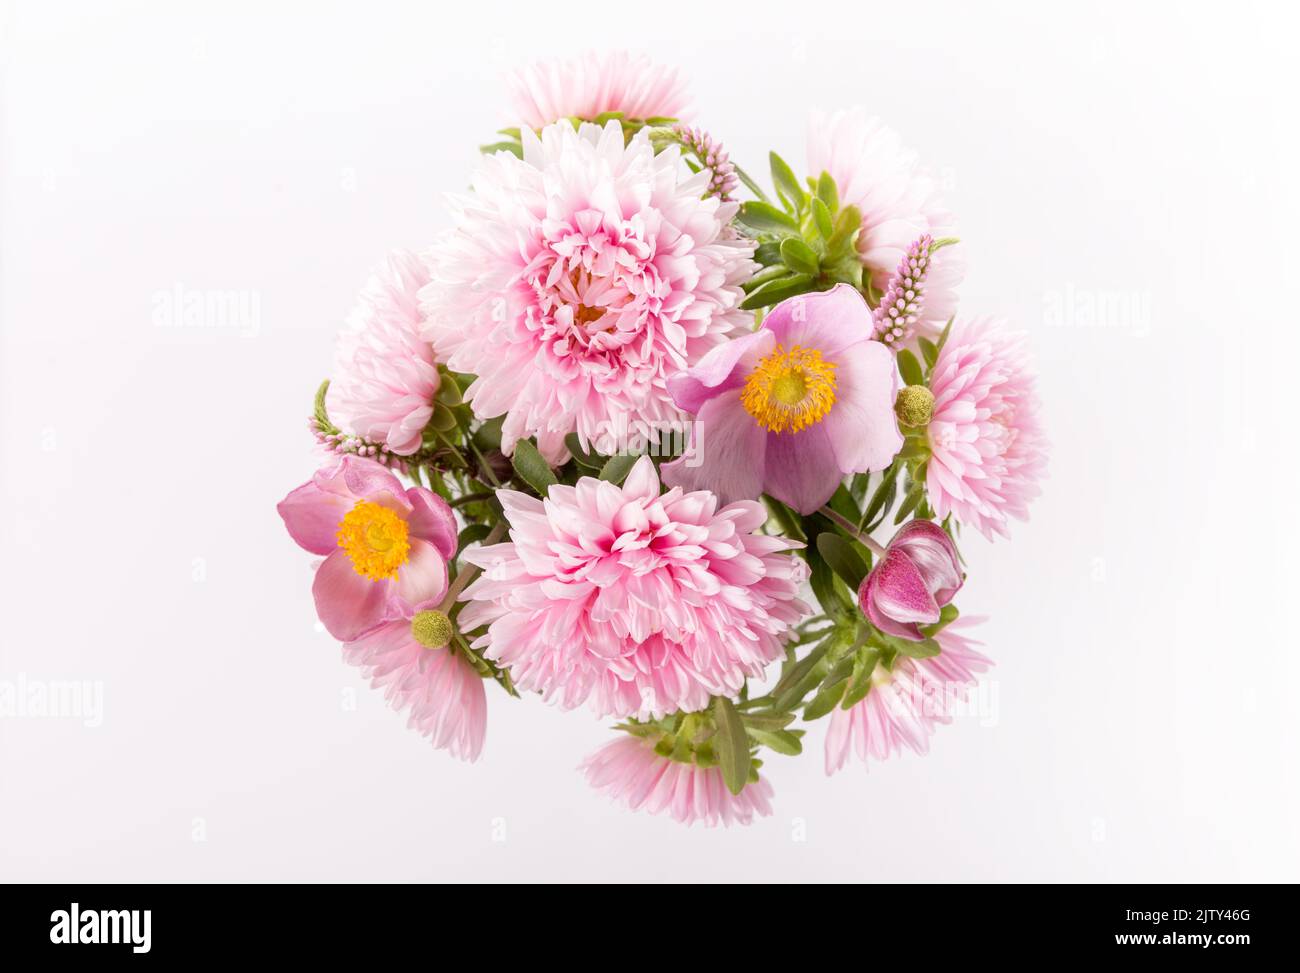 Graceful autumn bouquet of pink aster flowers, anemones on white background Stock Photo